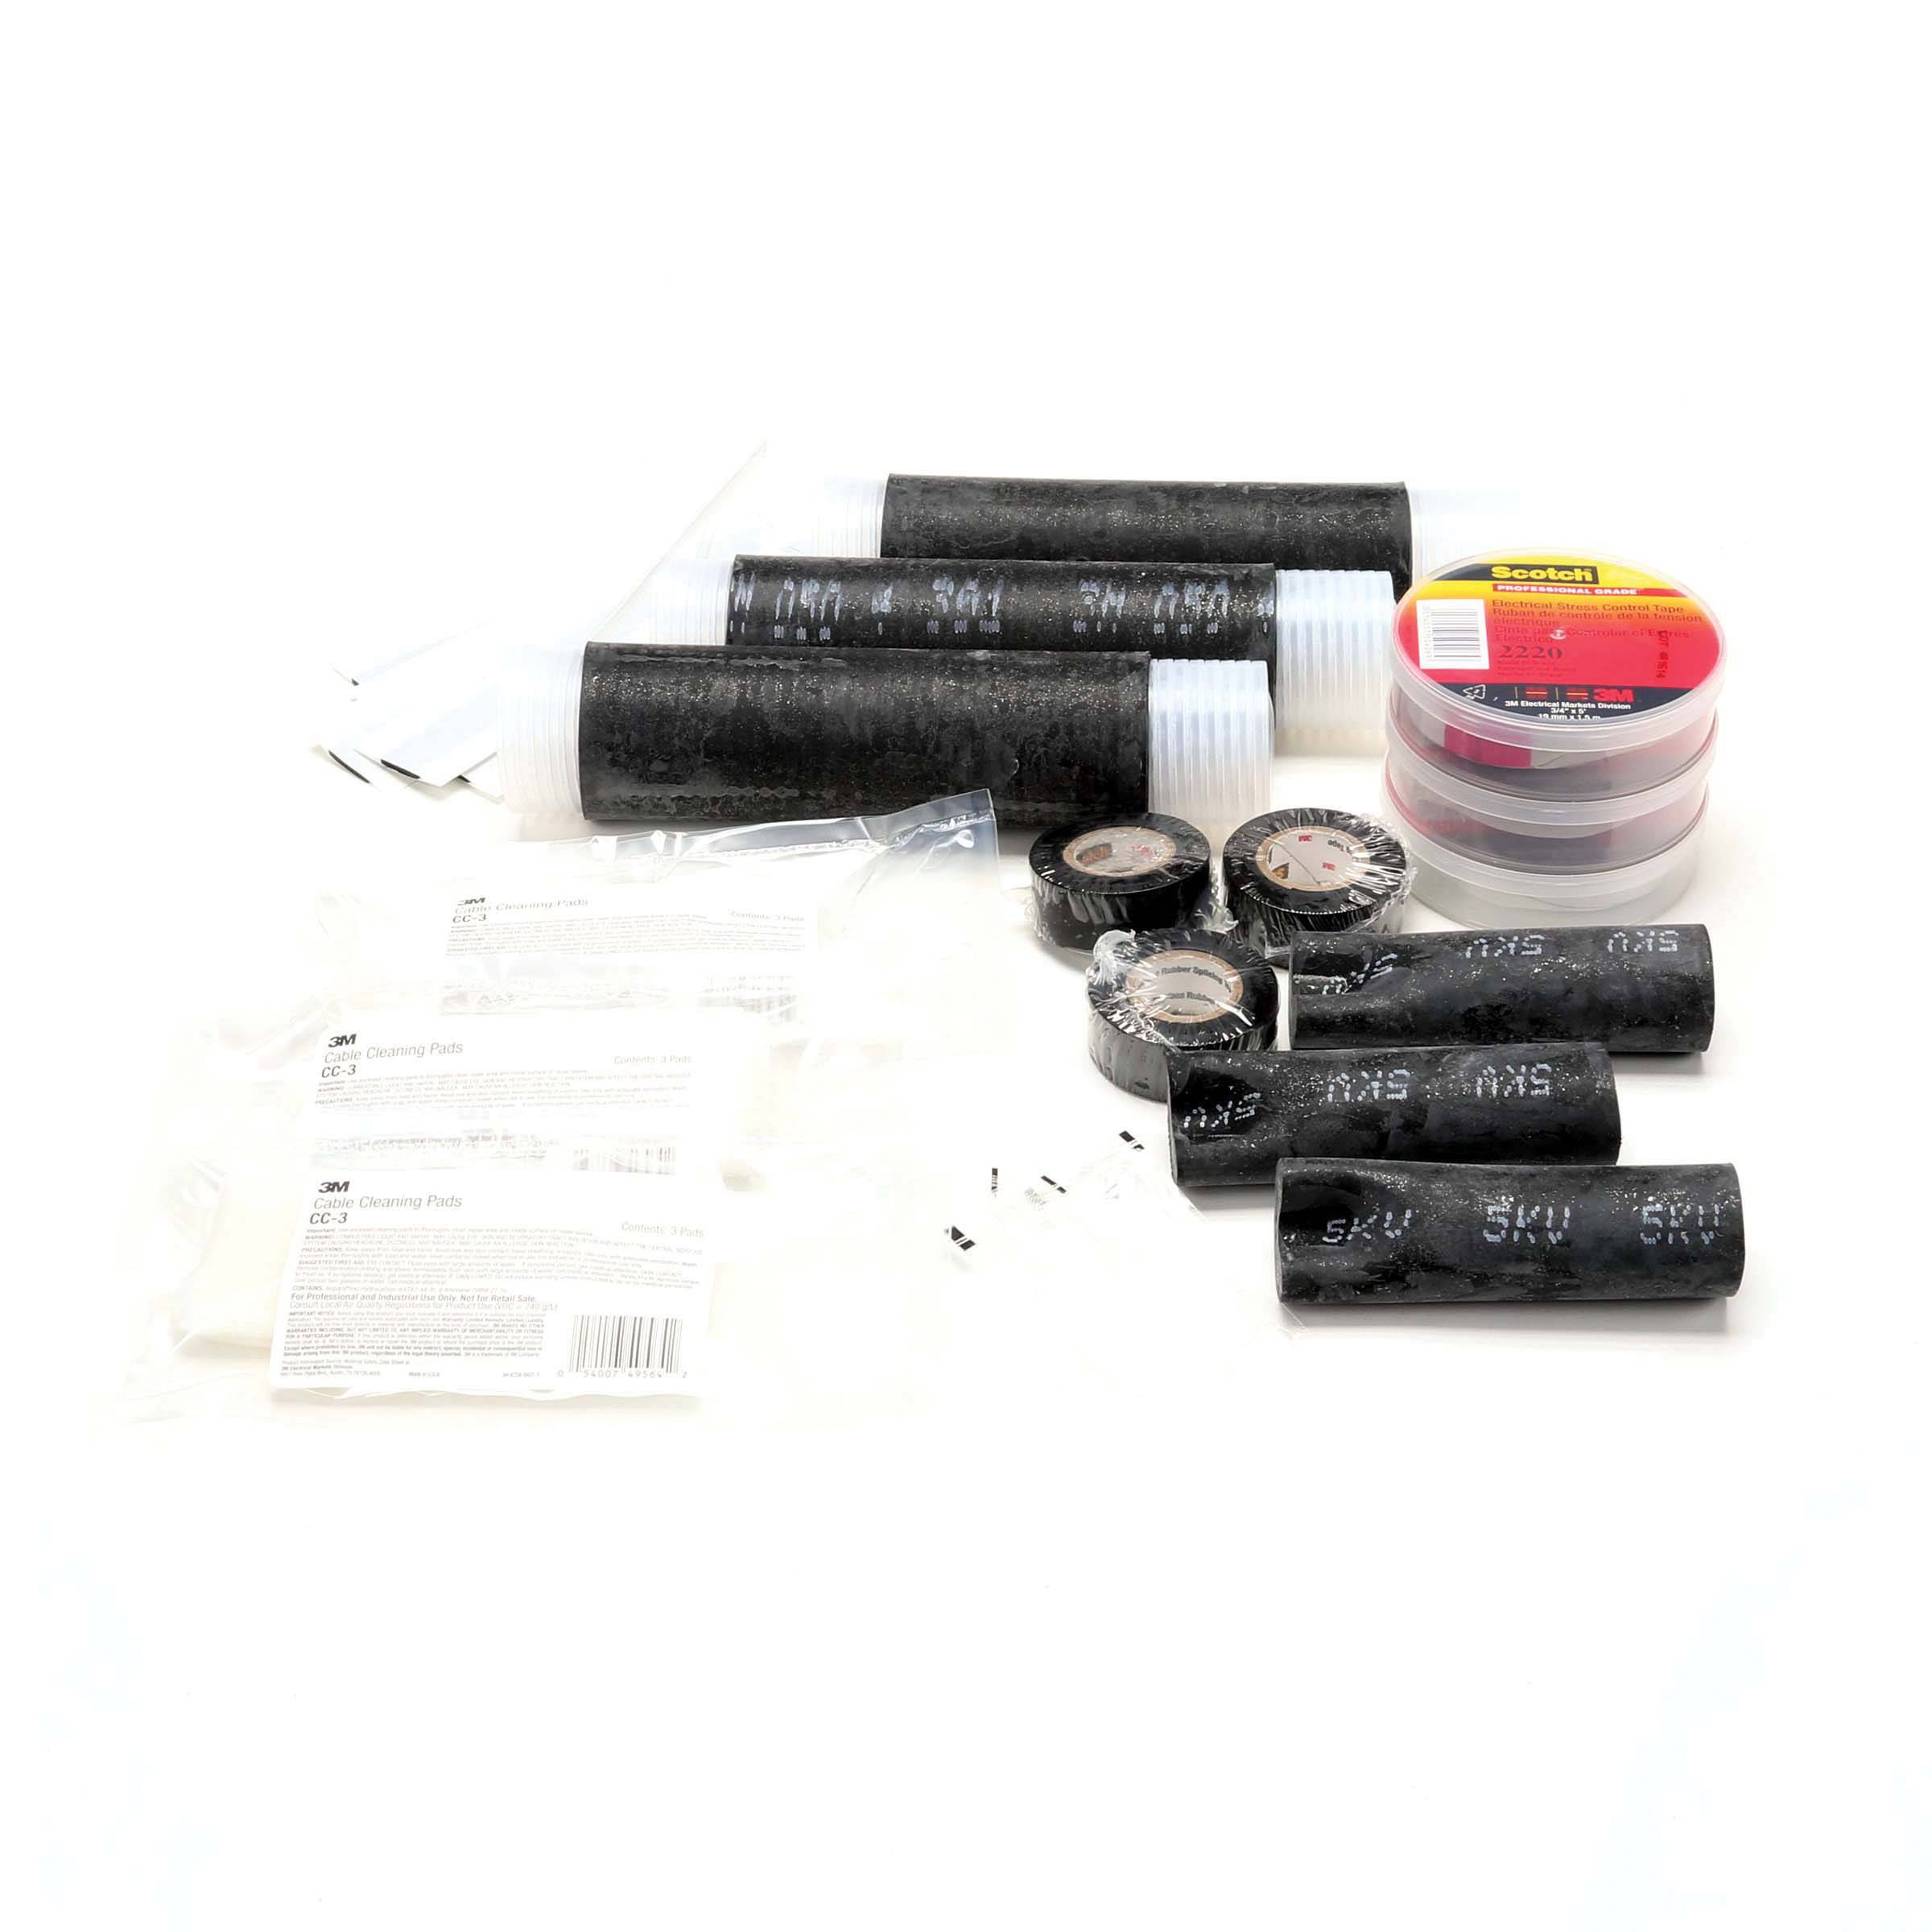 5 to 8 kV, 3M 5324 Motor Lead Pigtail Splice Kit (Discontinued by Manufacturer)